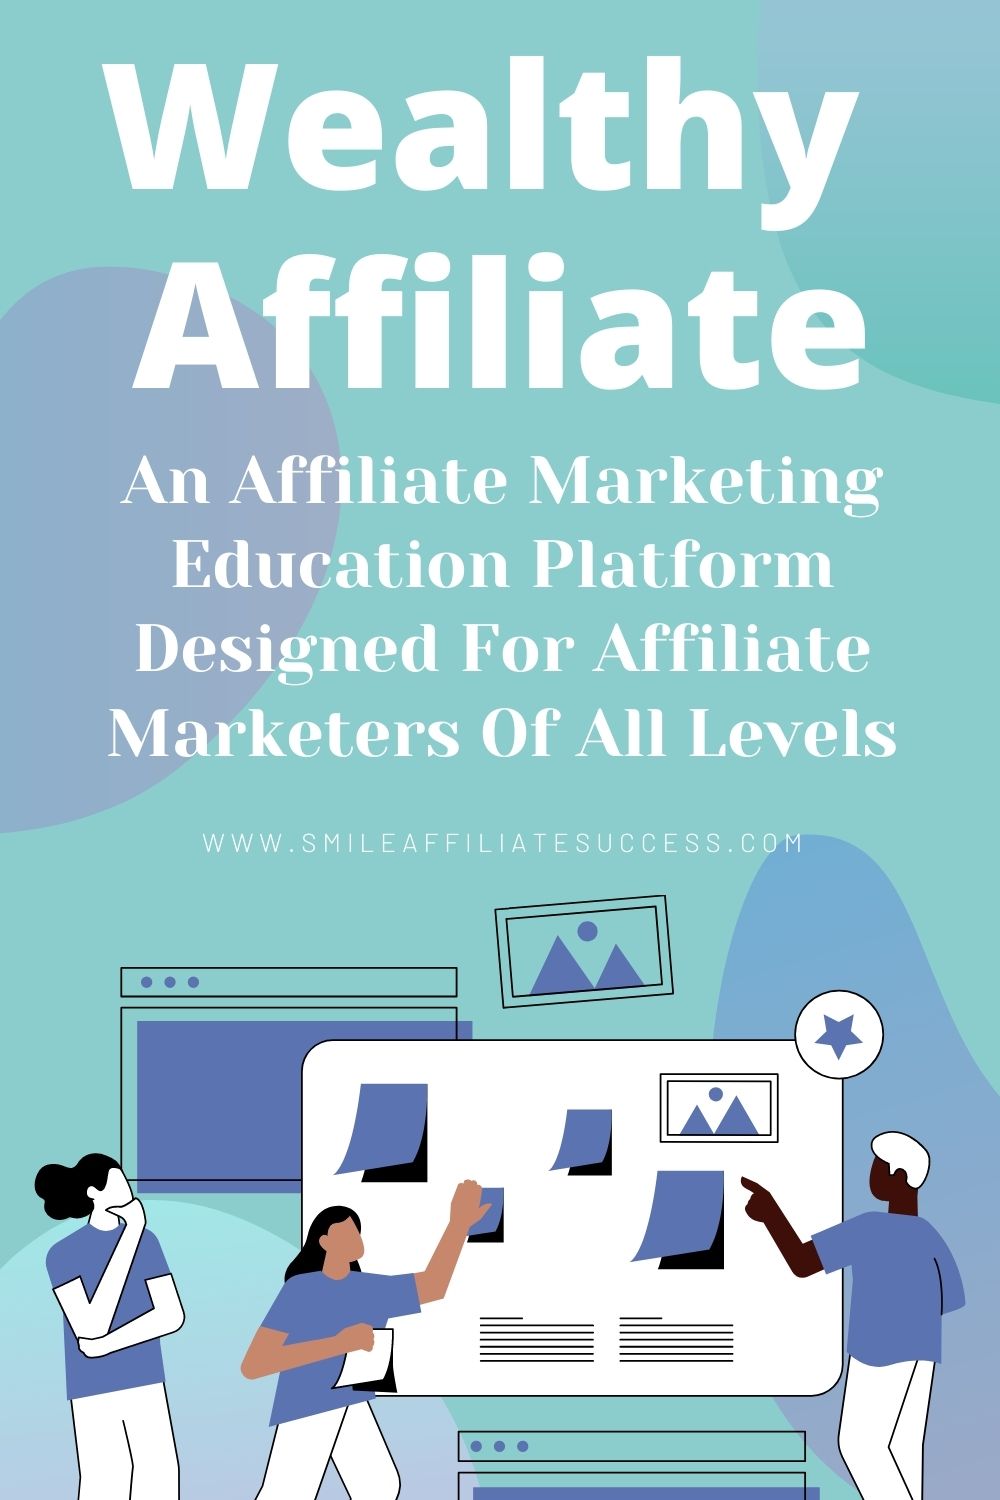 Wealthy Affiliate Review